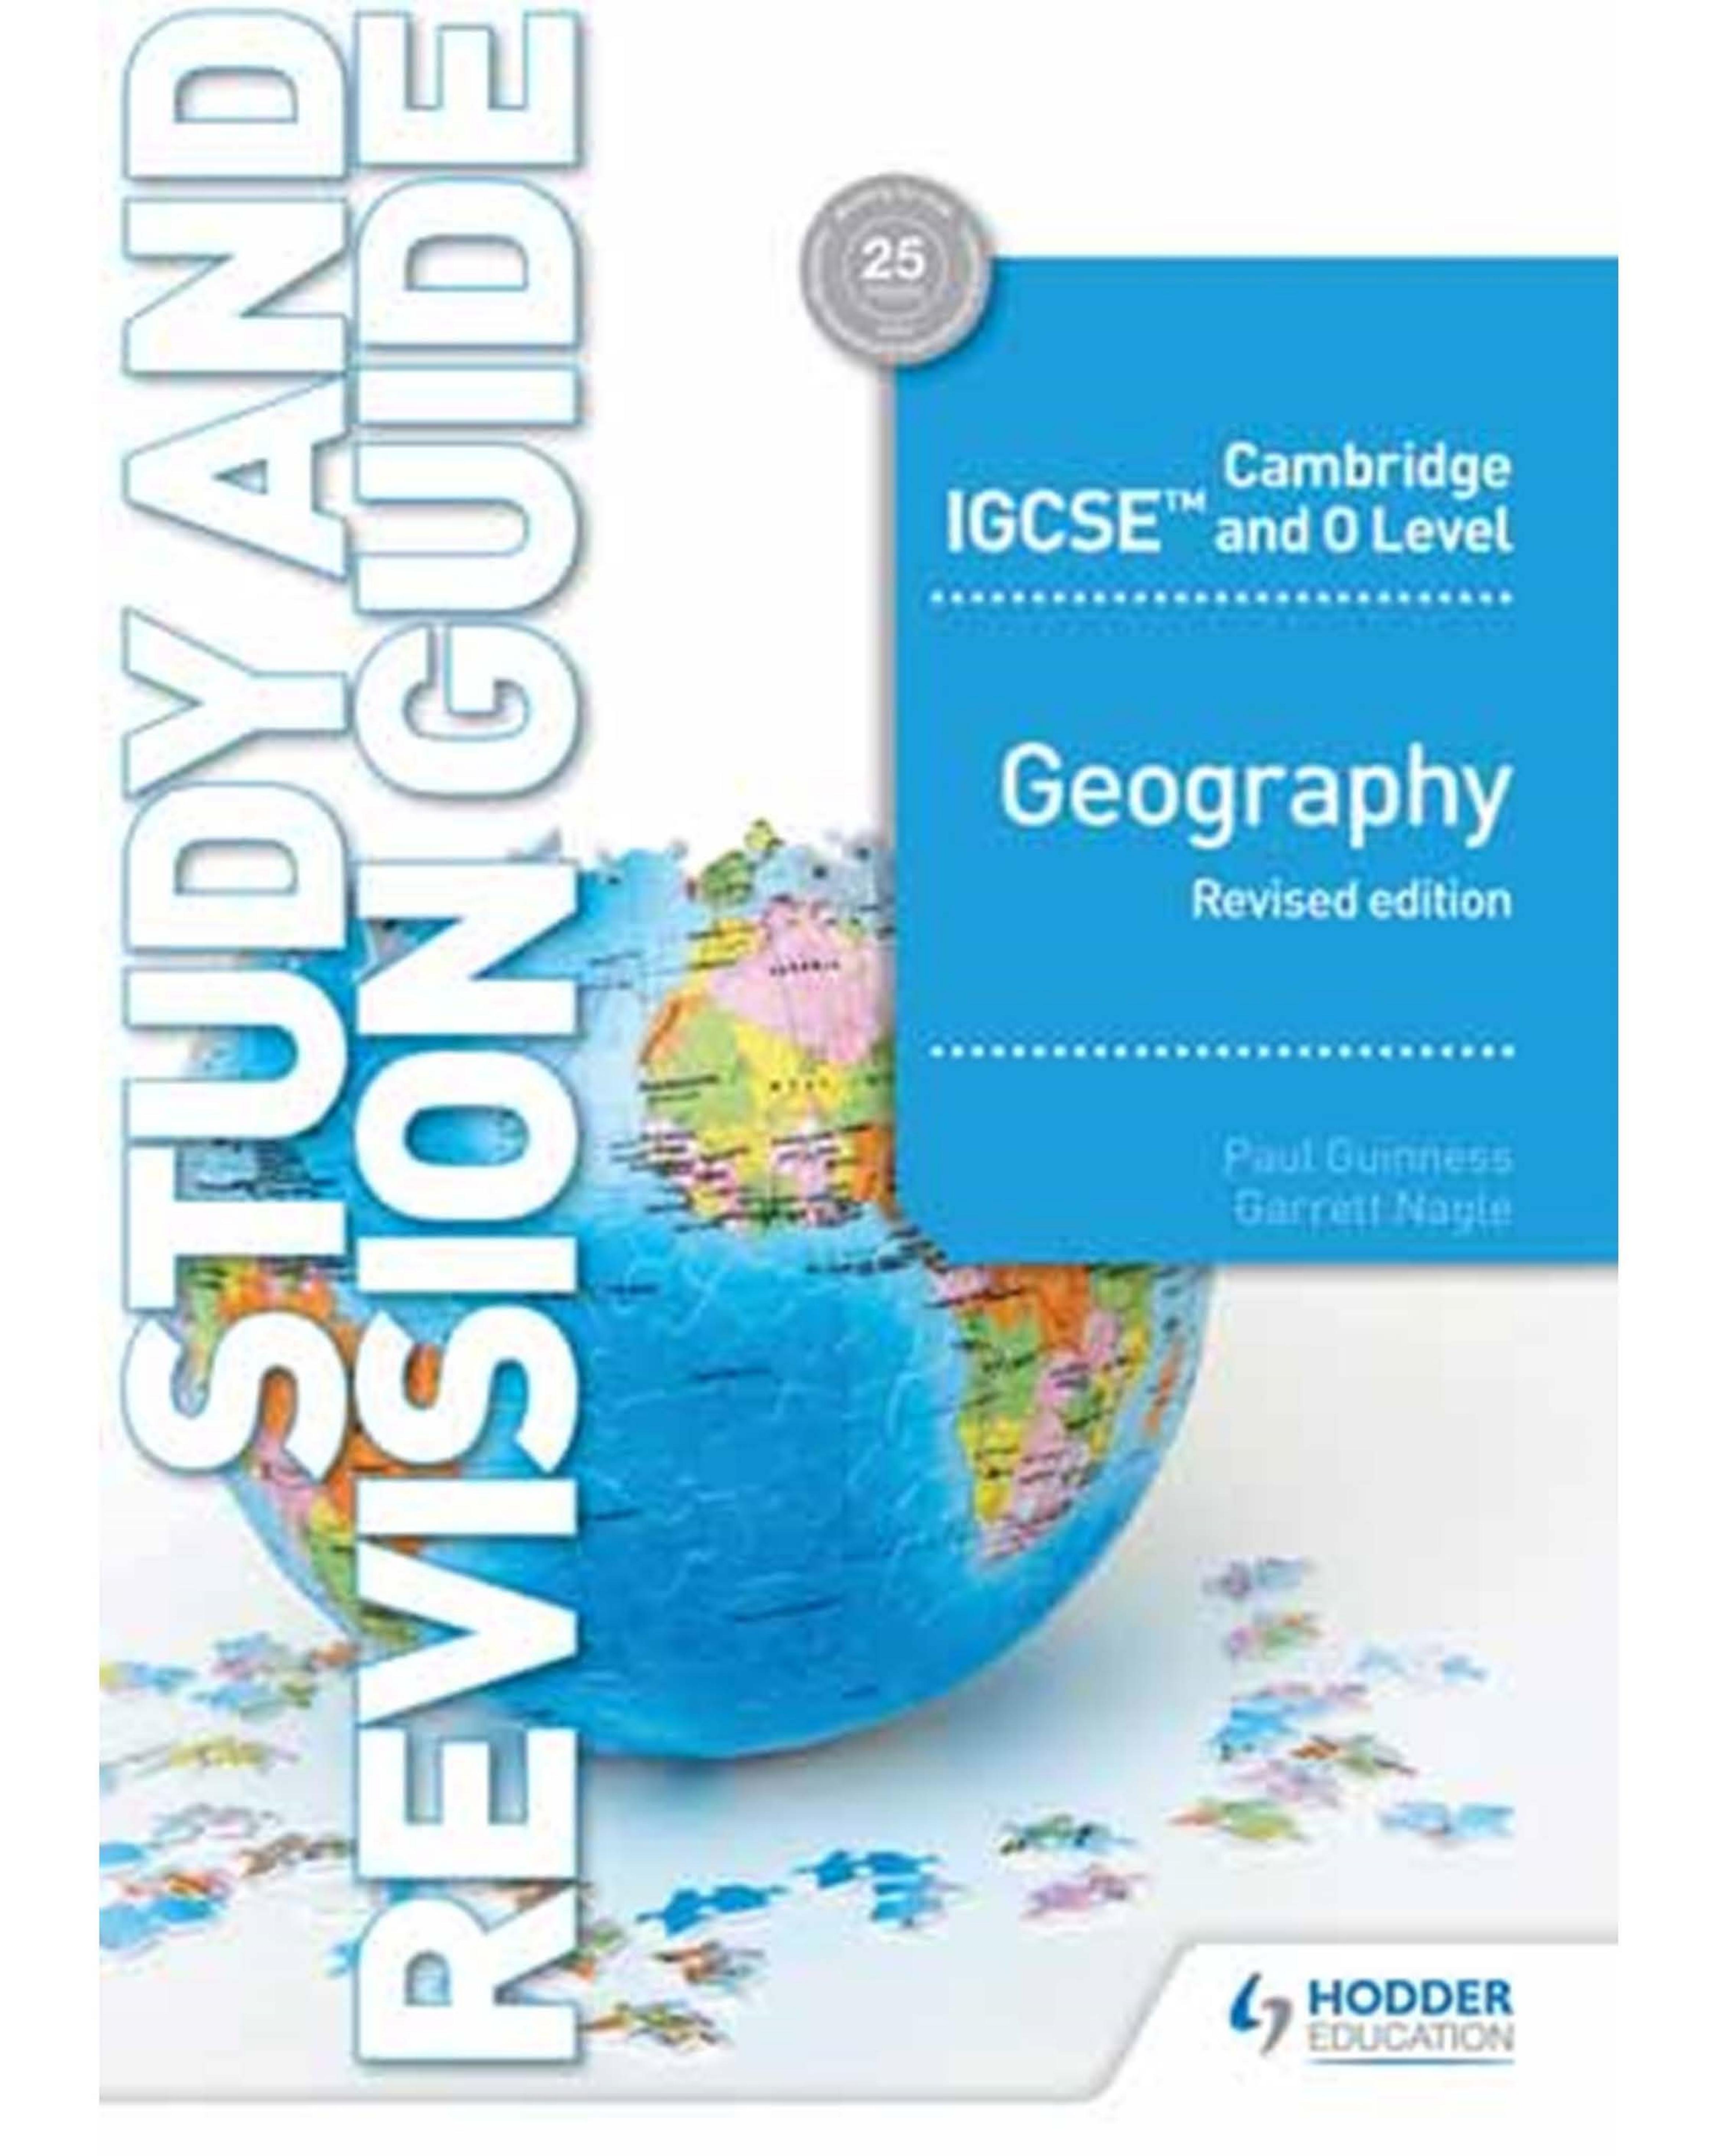 Cambridge IGCSE and O Level Geography Study and Revision Guide revised edition by Paul Guinness